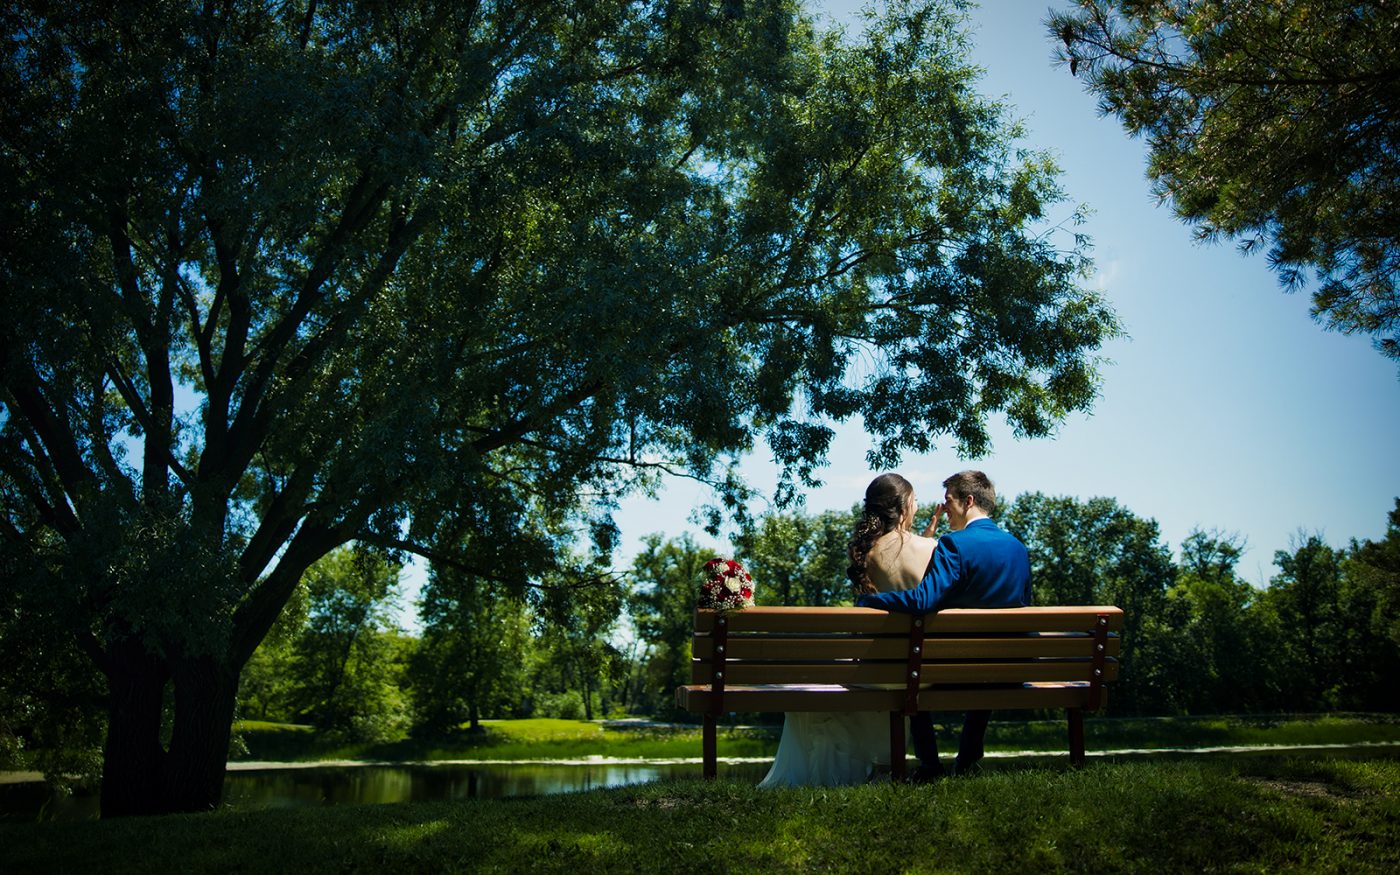 Jessie and Justin cuddling on a park bench